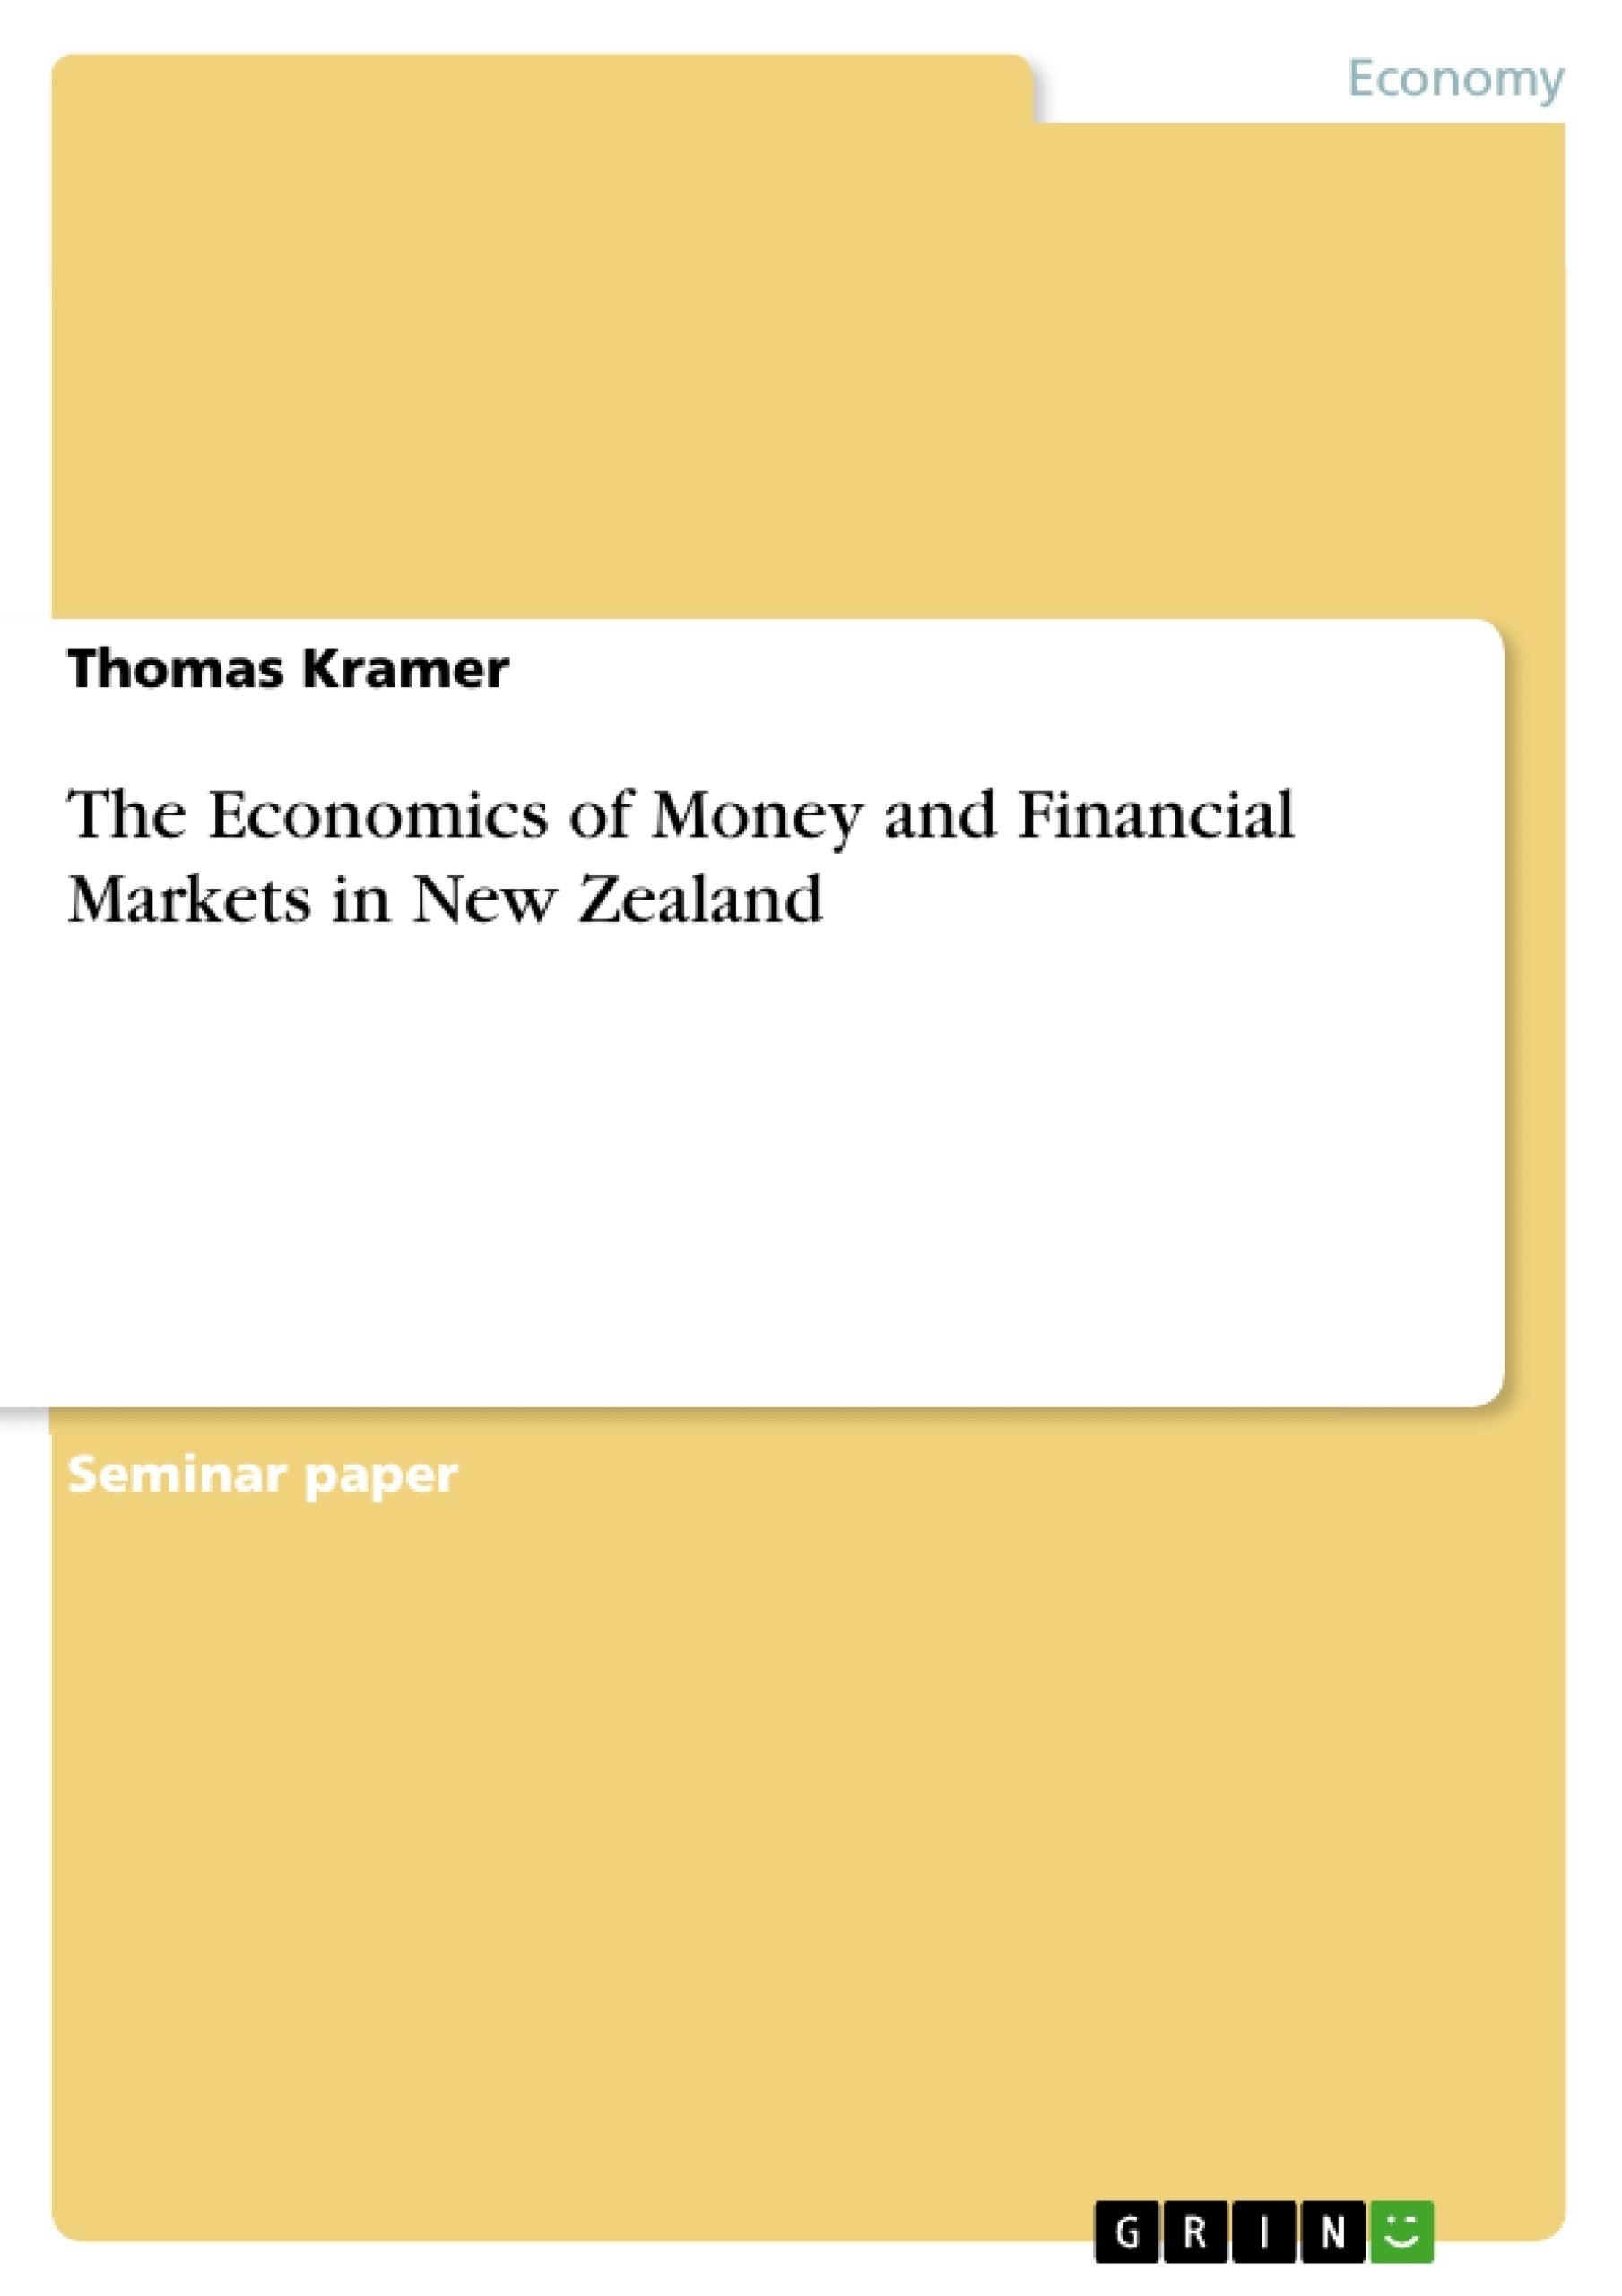 Title: The Economics of Money and Financial Markets in New Zealand